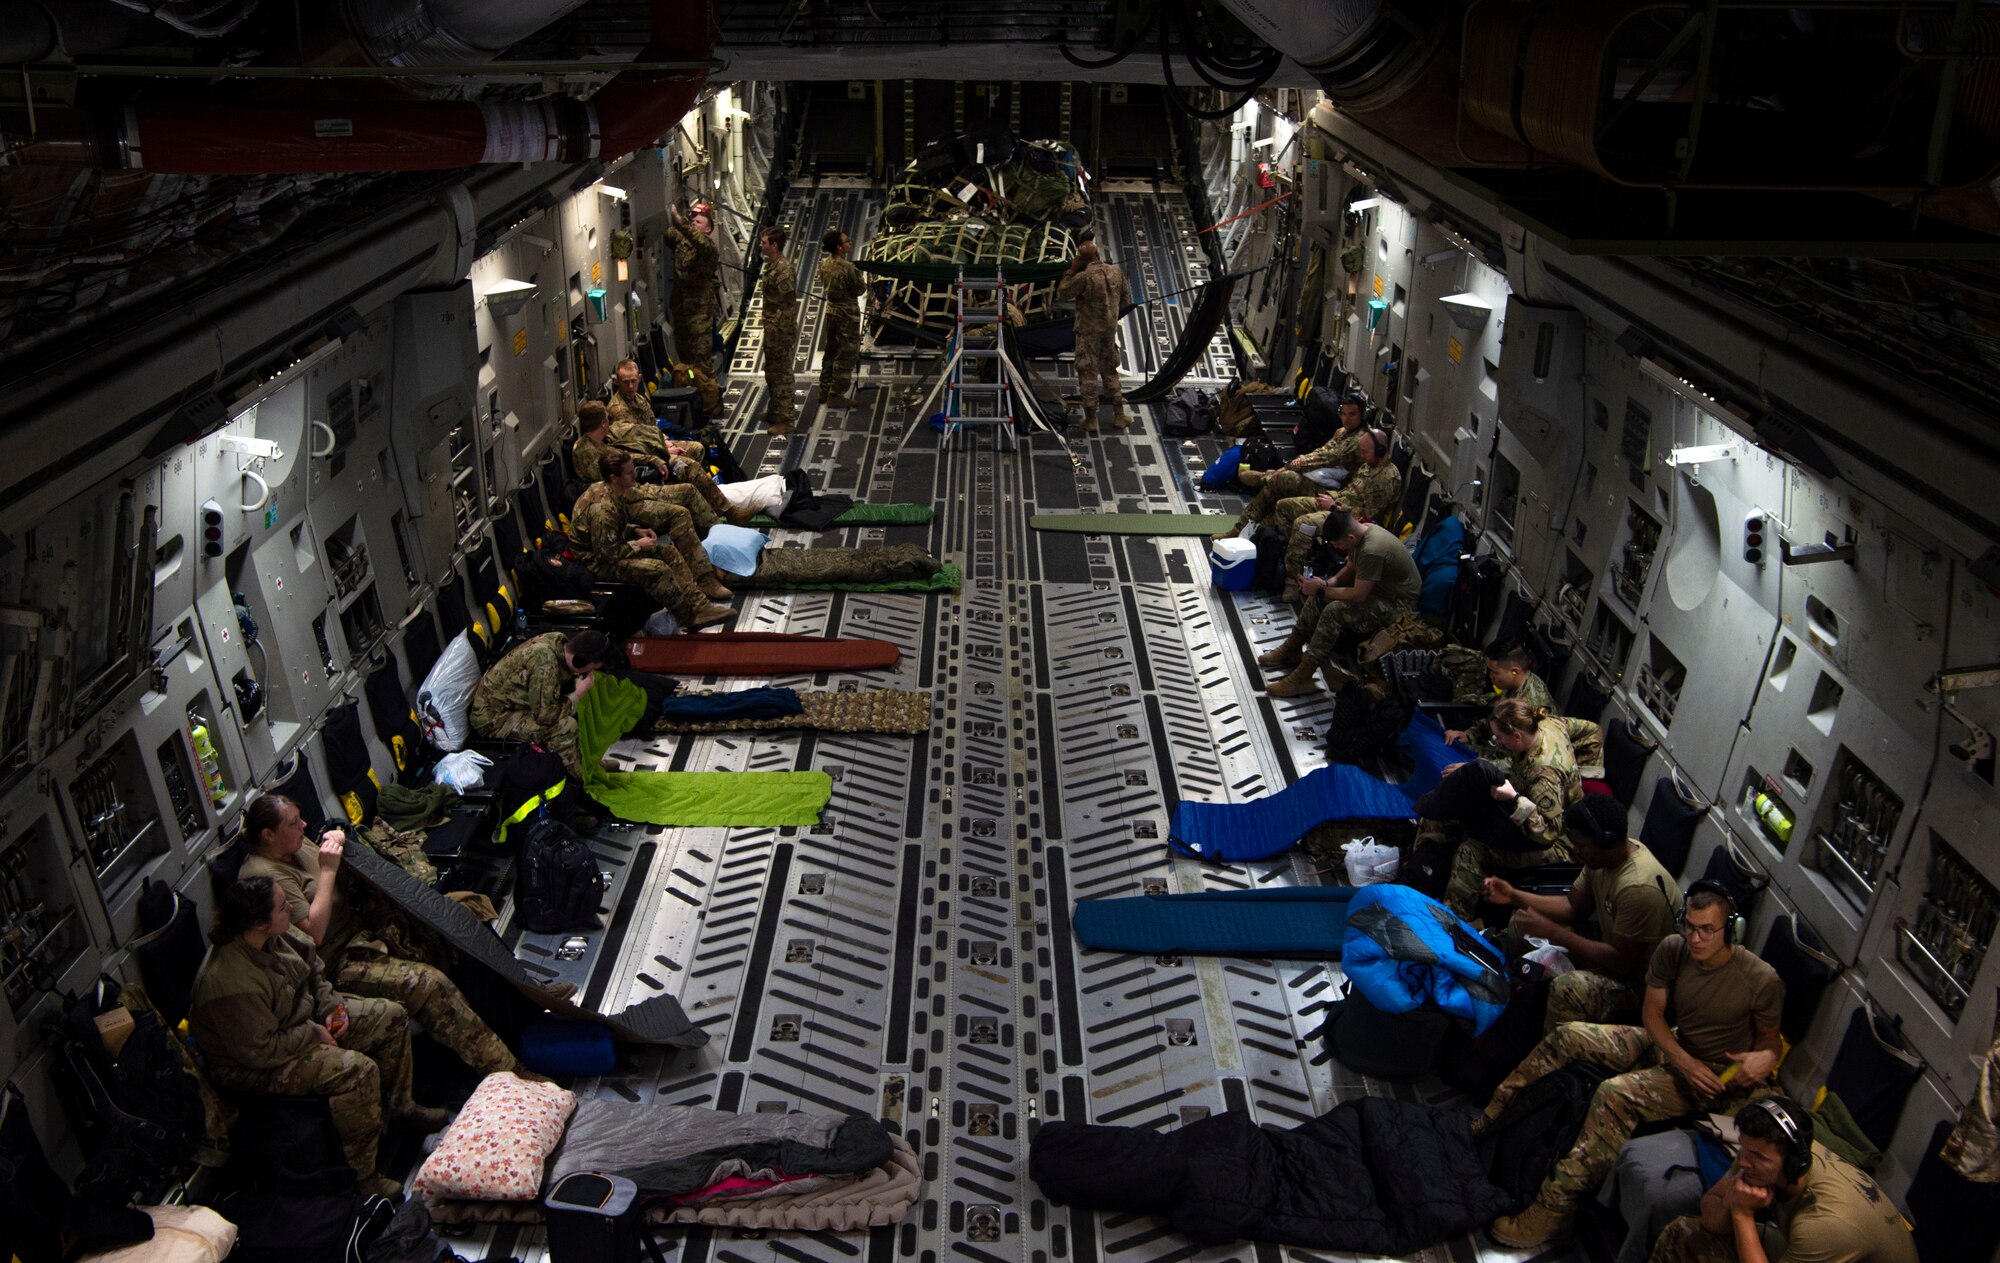 U.S. Airmen assigned to Joint Base Lewis-McChord, Washington; Joint Base McGuire-Dix-Lakehurst, New Jersey; and Dover Air Force Base, Delaware, prepare to sleep on a C-17 Globemaster III before taking off from Al Udeid Air Base, Qatar, Dec. 1, 2021. The Airmen are returning home after having been deployed to the 816th Expeditionary Airlift Squadron. (U.S. Air Force photo by Staff Sgt. Tryphena Mayhugh)